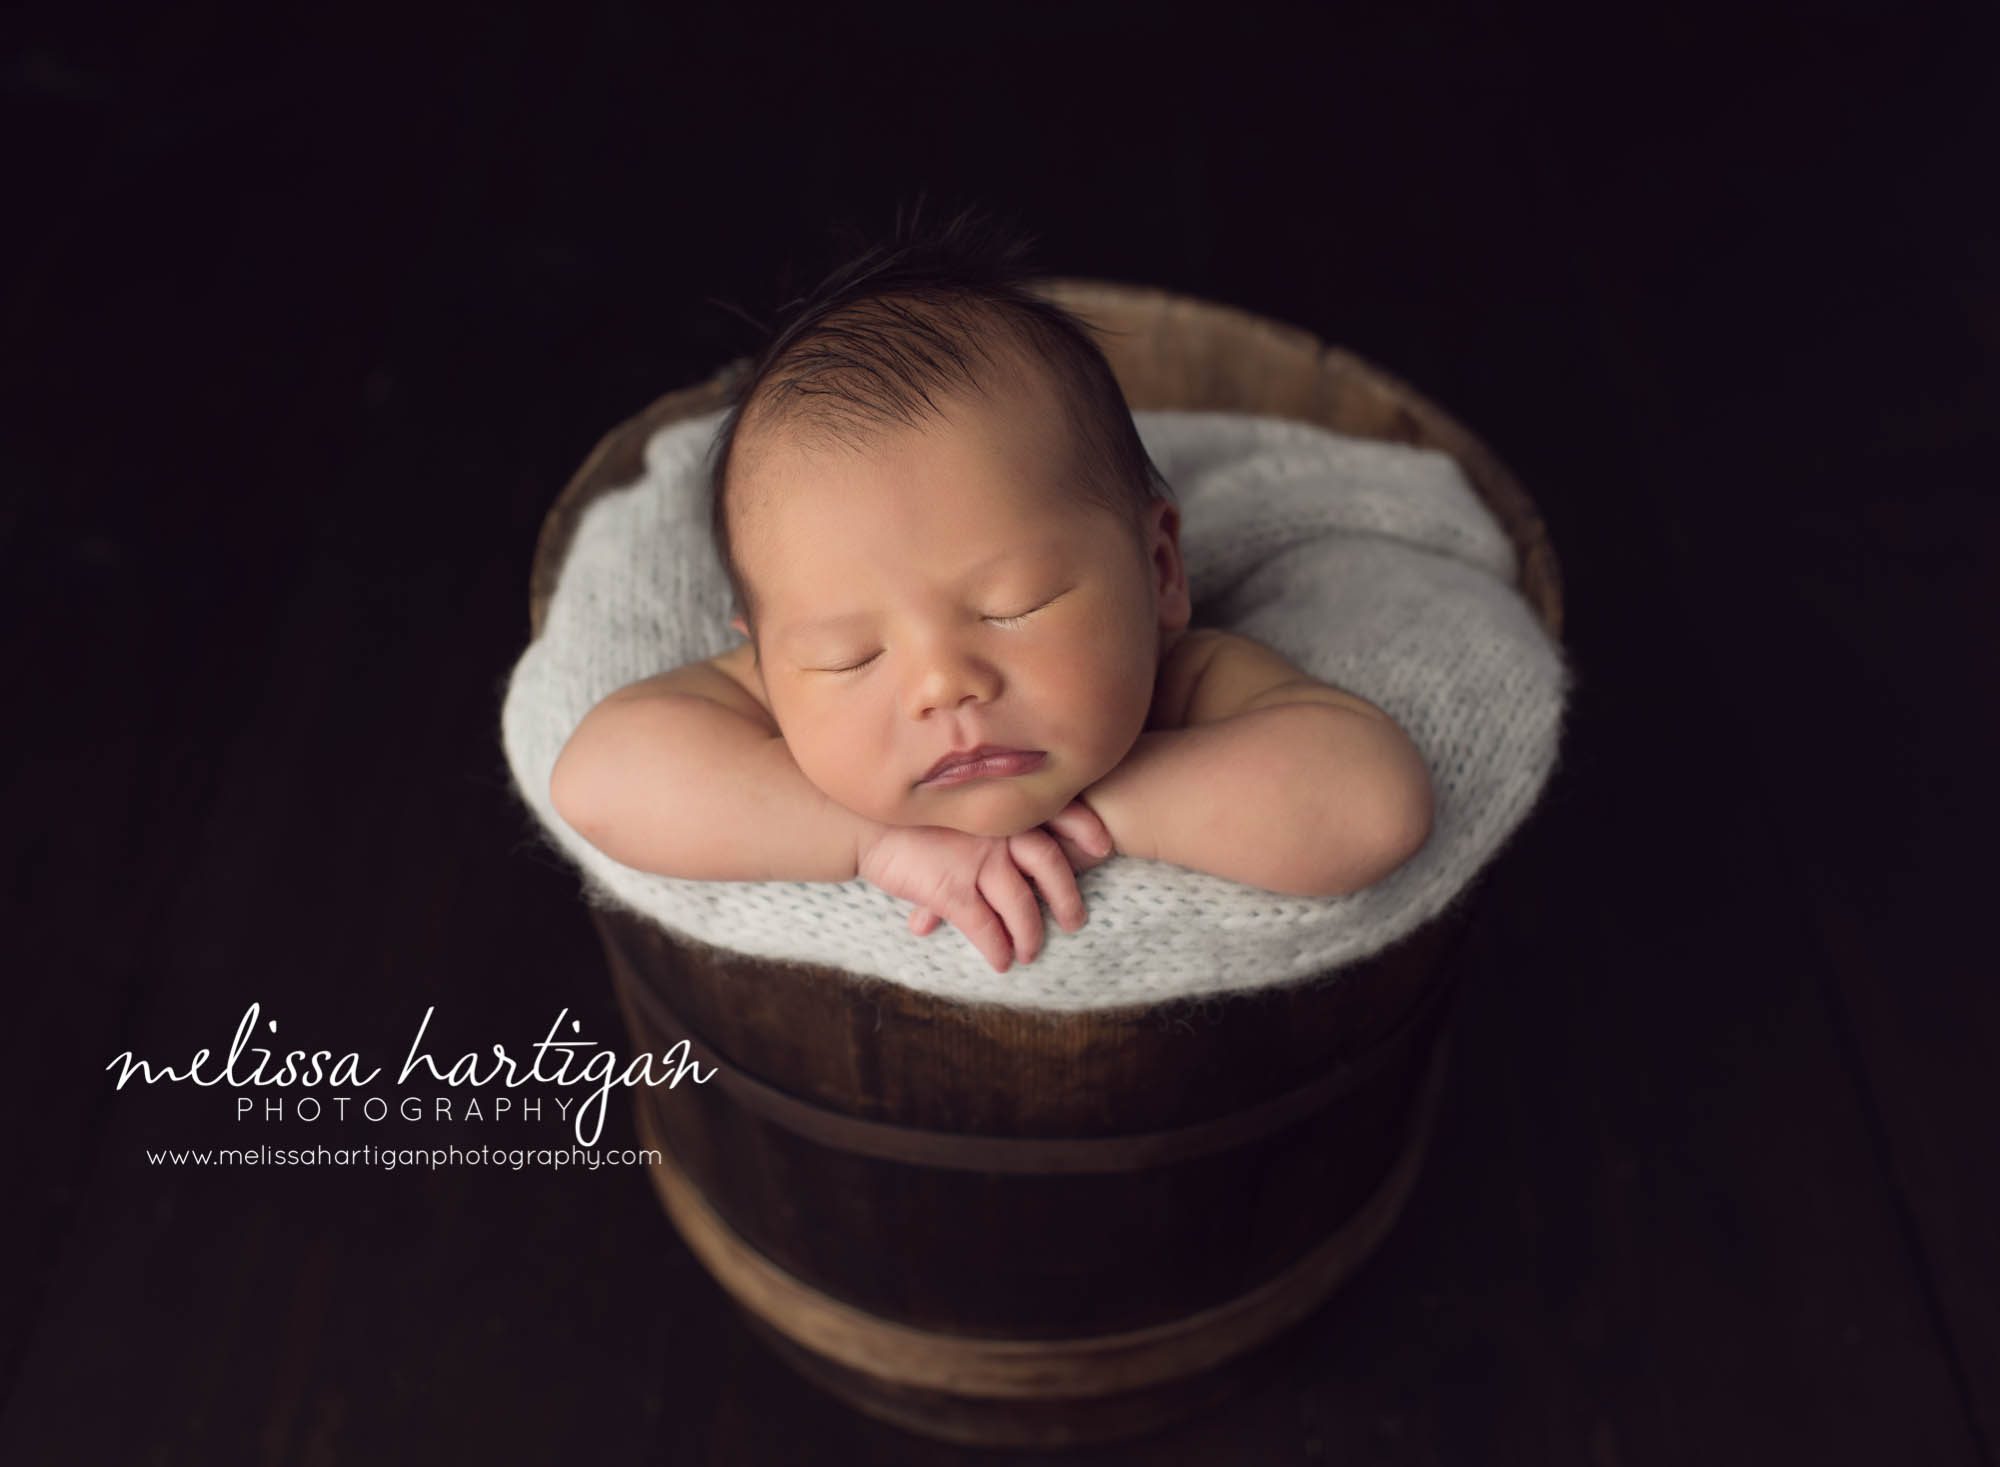 Melissa Hartigan Photography Maternity and Newborn Connecticut Photographer Lucas Newborn Session Baby boy in wooden bucket with light blue knit blanket sleeping on arms